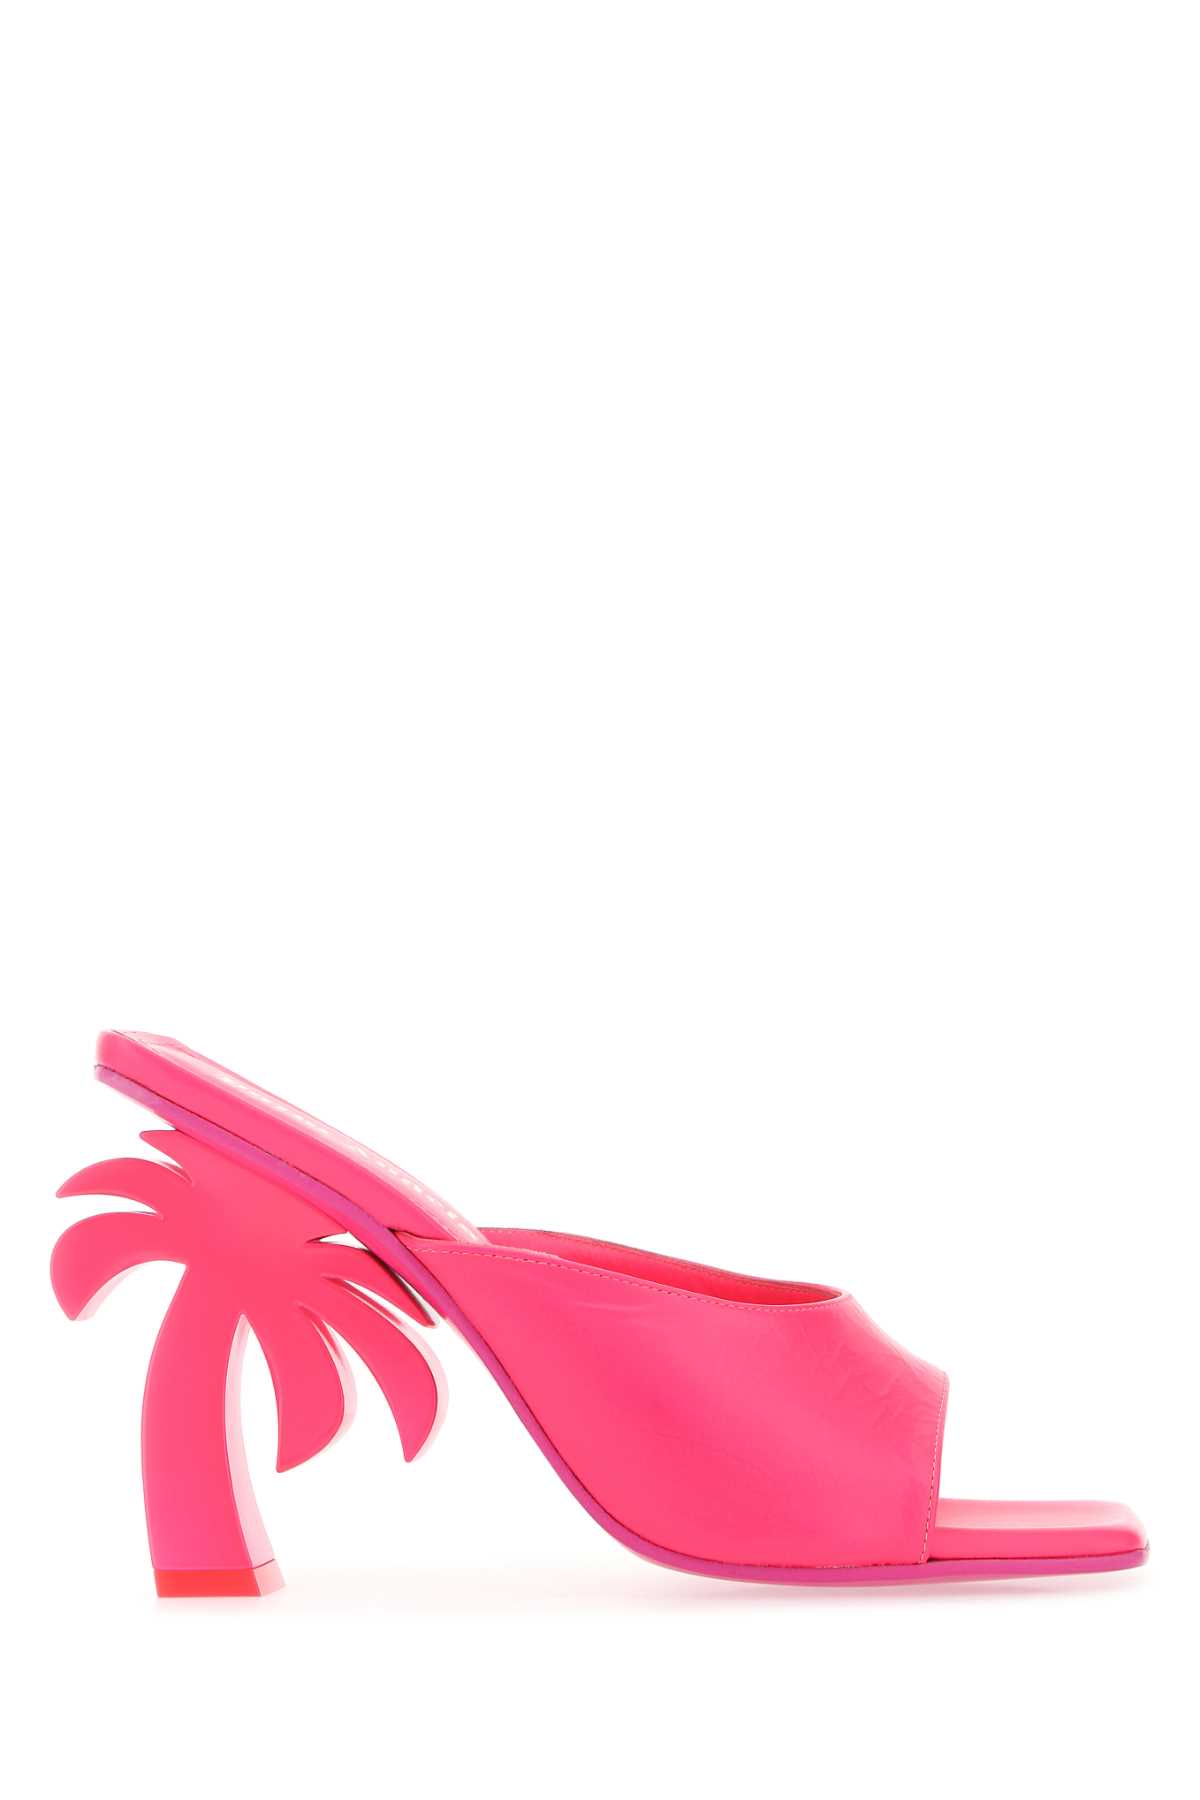 Palm Angels Fluo Pink Leather Mules